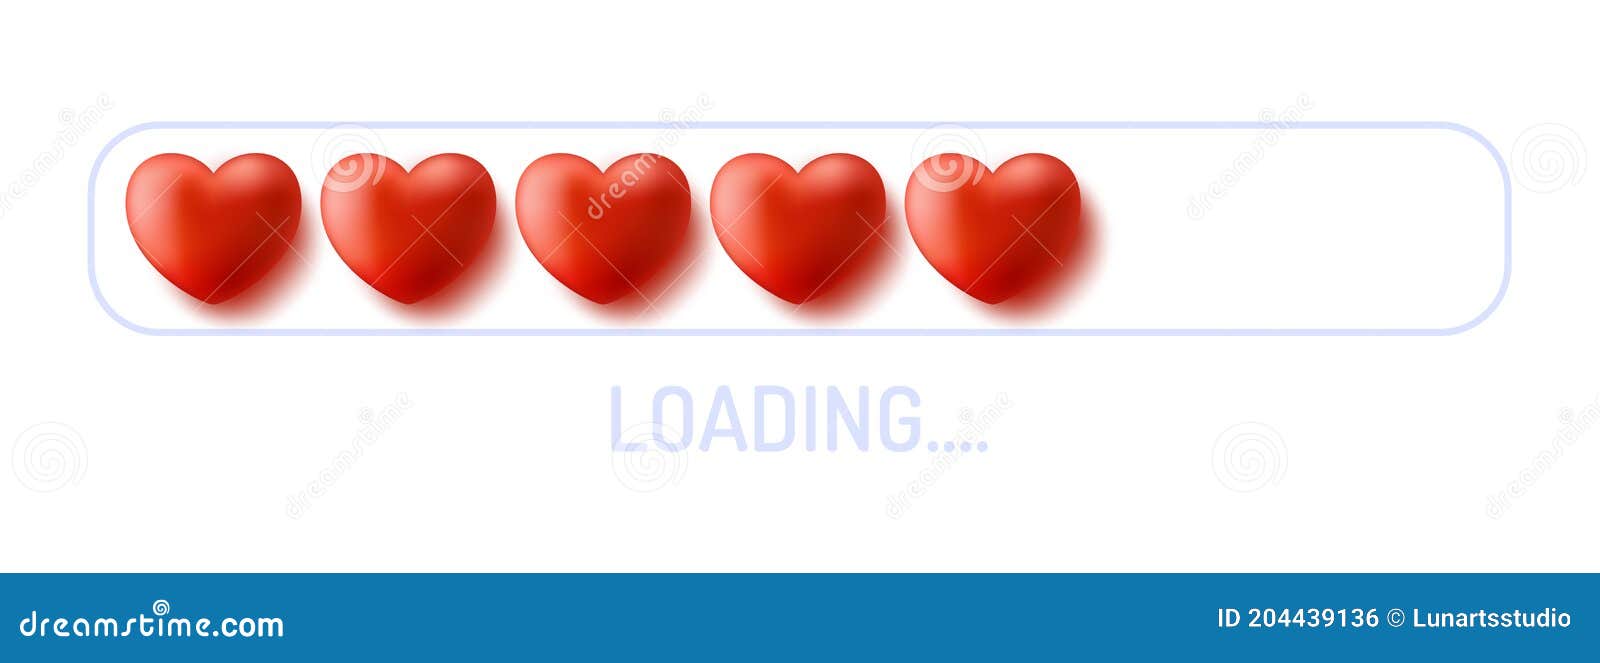 Love Loading Concept. Progress Status Bar with Realistic Red Heart. Funny  Happy Valentines Day Element Stock Vector - Illustration of card, banner:  204439136